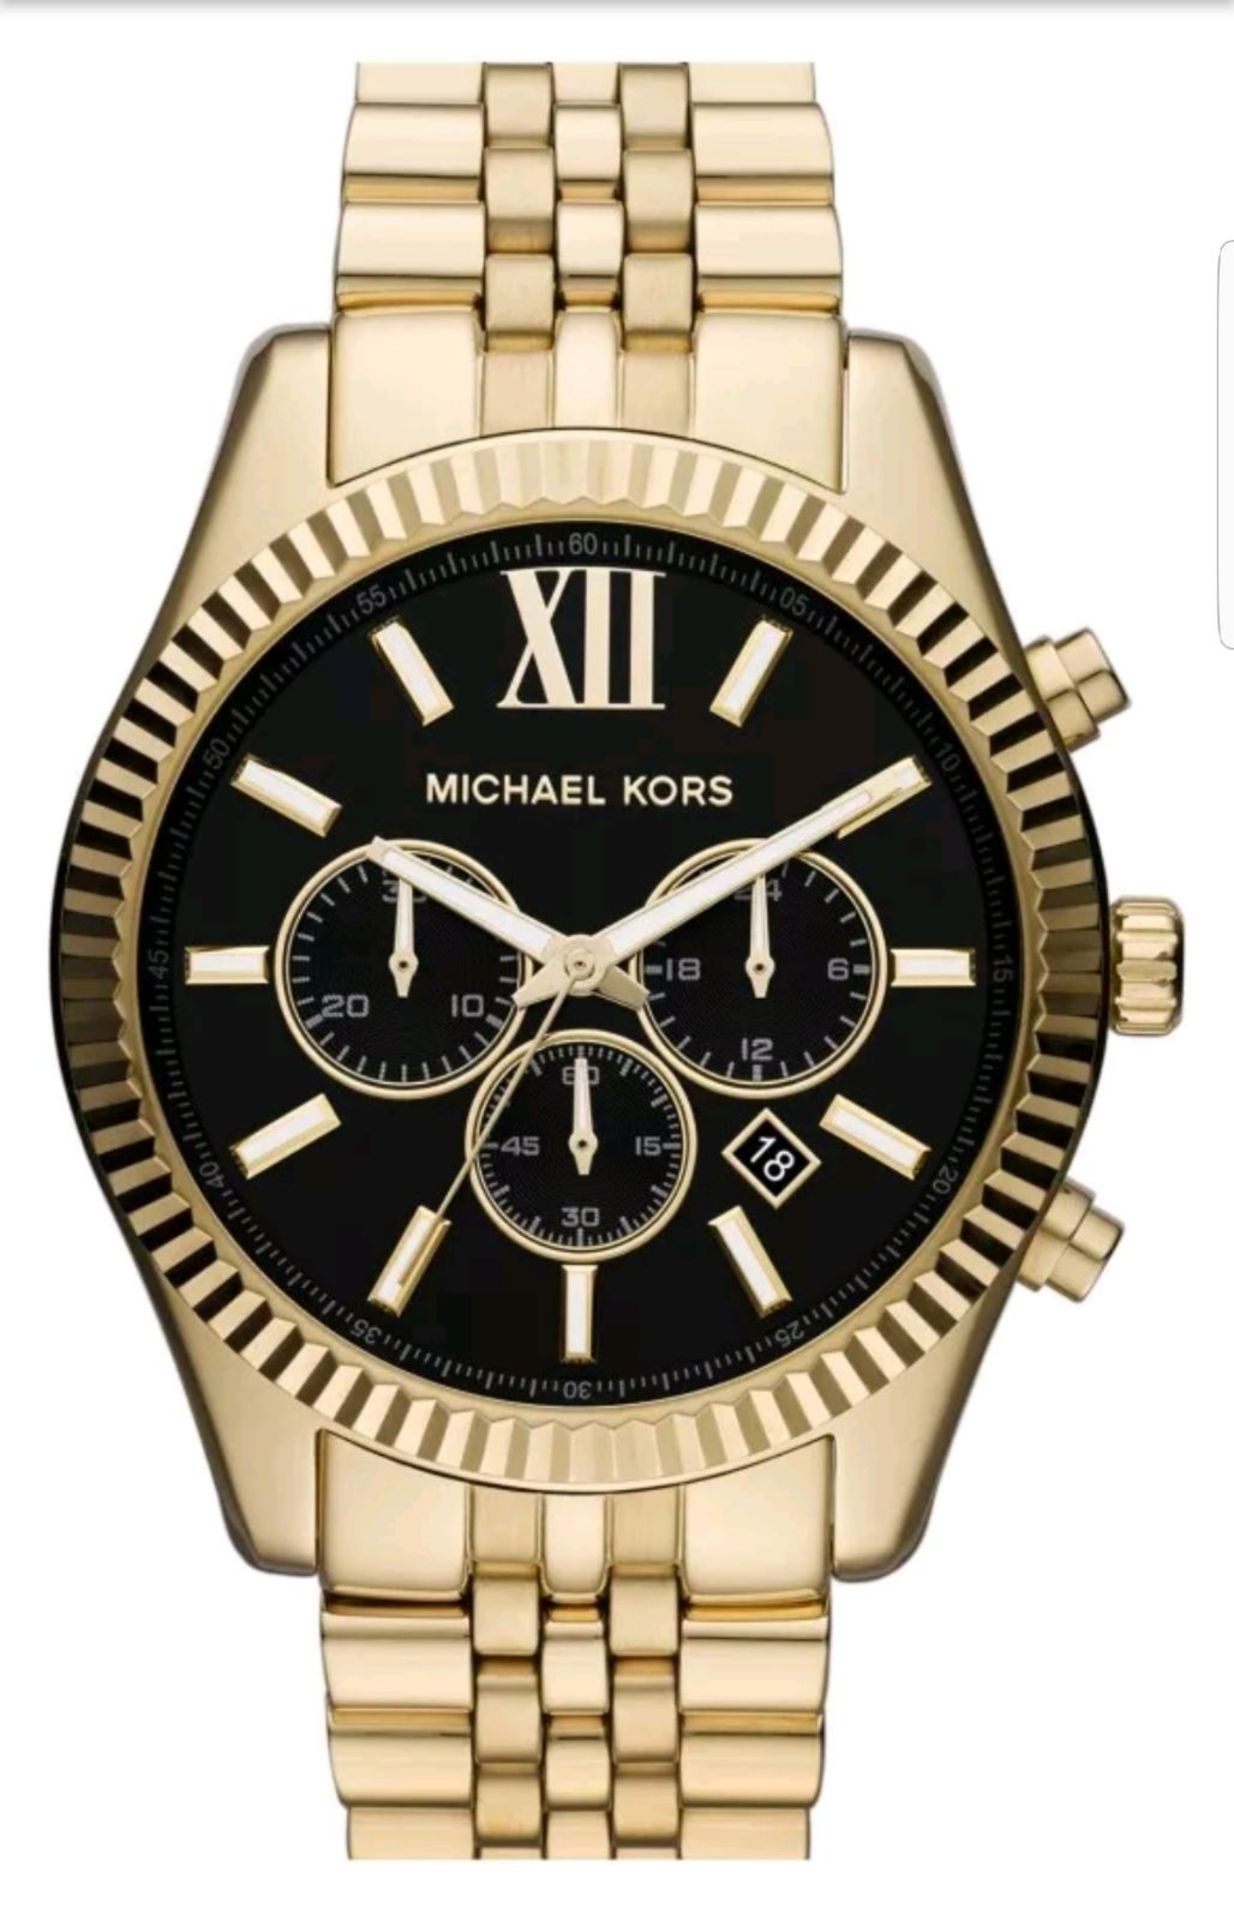 Brand New Gents Michael Kors Watch Mk8286, Complete With Original Box And Manual - Free P &Amp; P